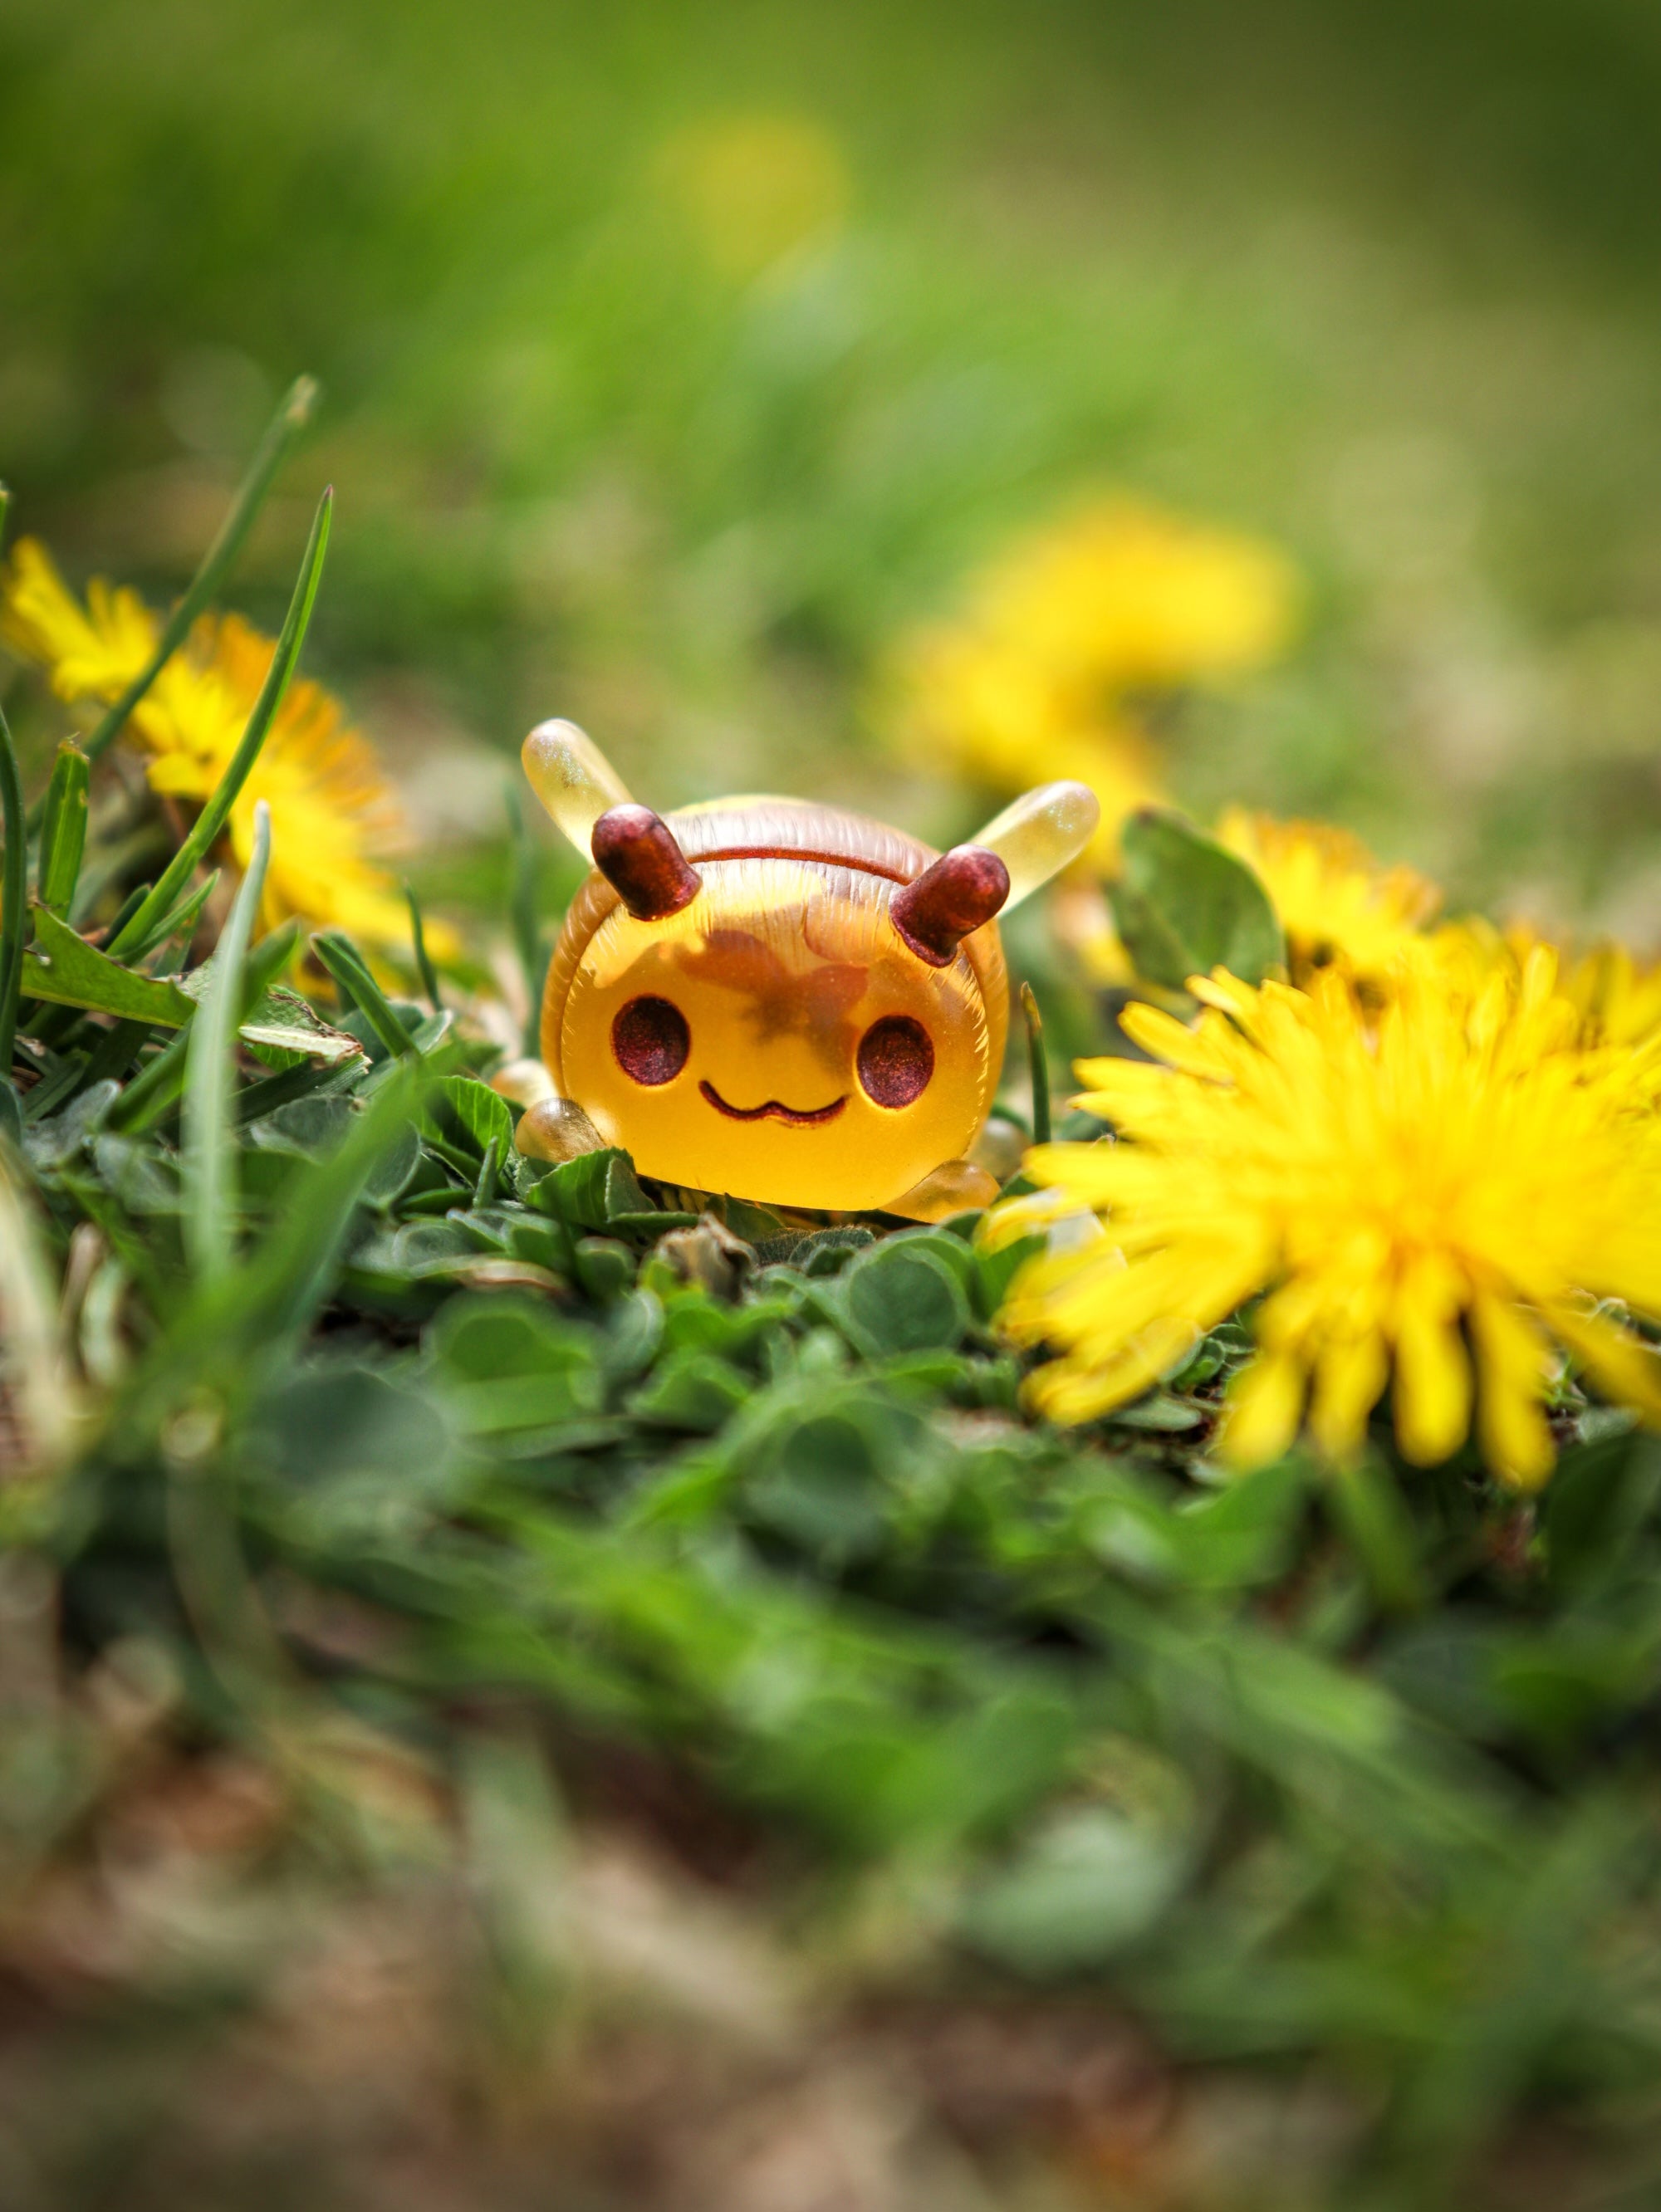 A yellow insect toy on grass with flowers, part of the GRUBLETS collection by Fairies And Fancies at Strangecat Toys. Approximately 1-2 inches tall, made of Polymer Clay and Resin.